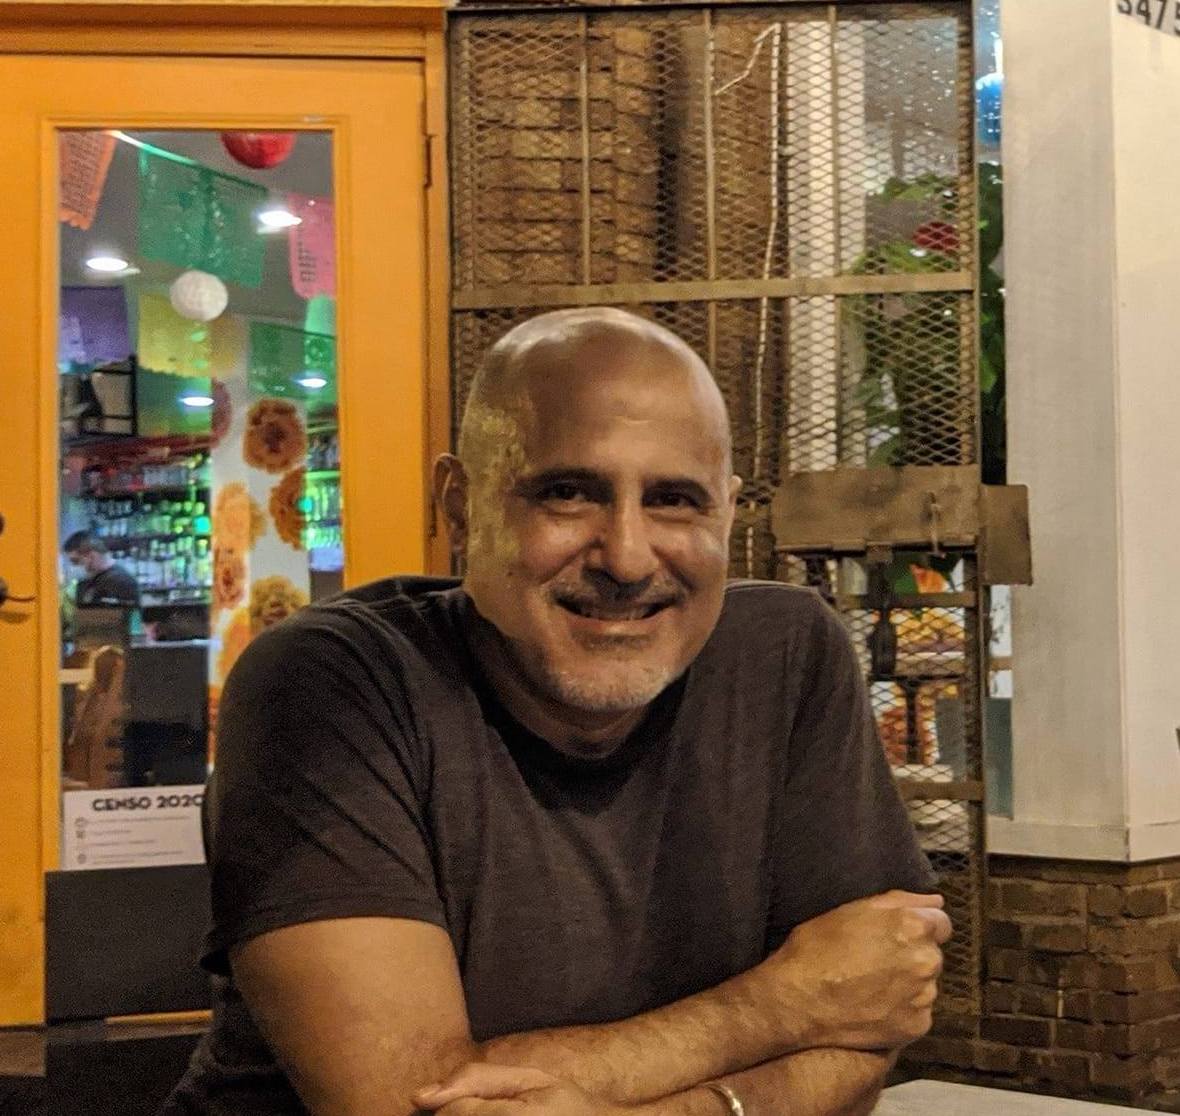 A headshot of a brown-skinned bald man sitting in front of a bodega with his arms crossed and resting on a table. He is wearing a brown t-shirt and smiling at the camera.